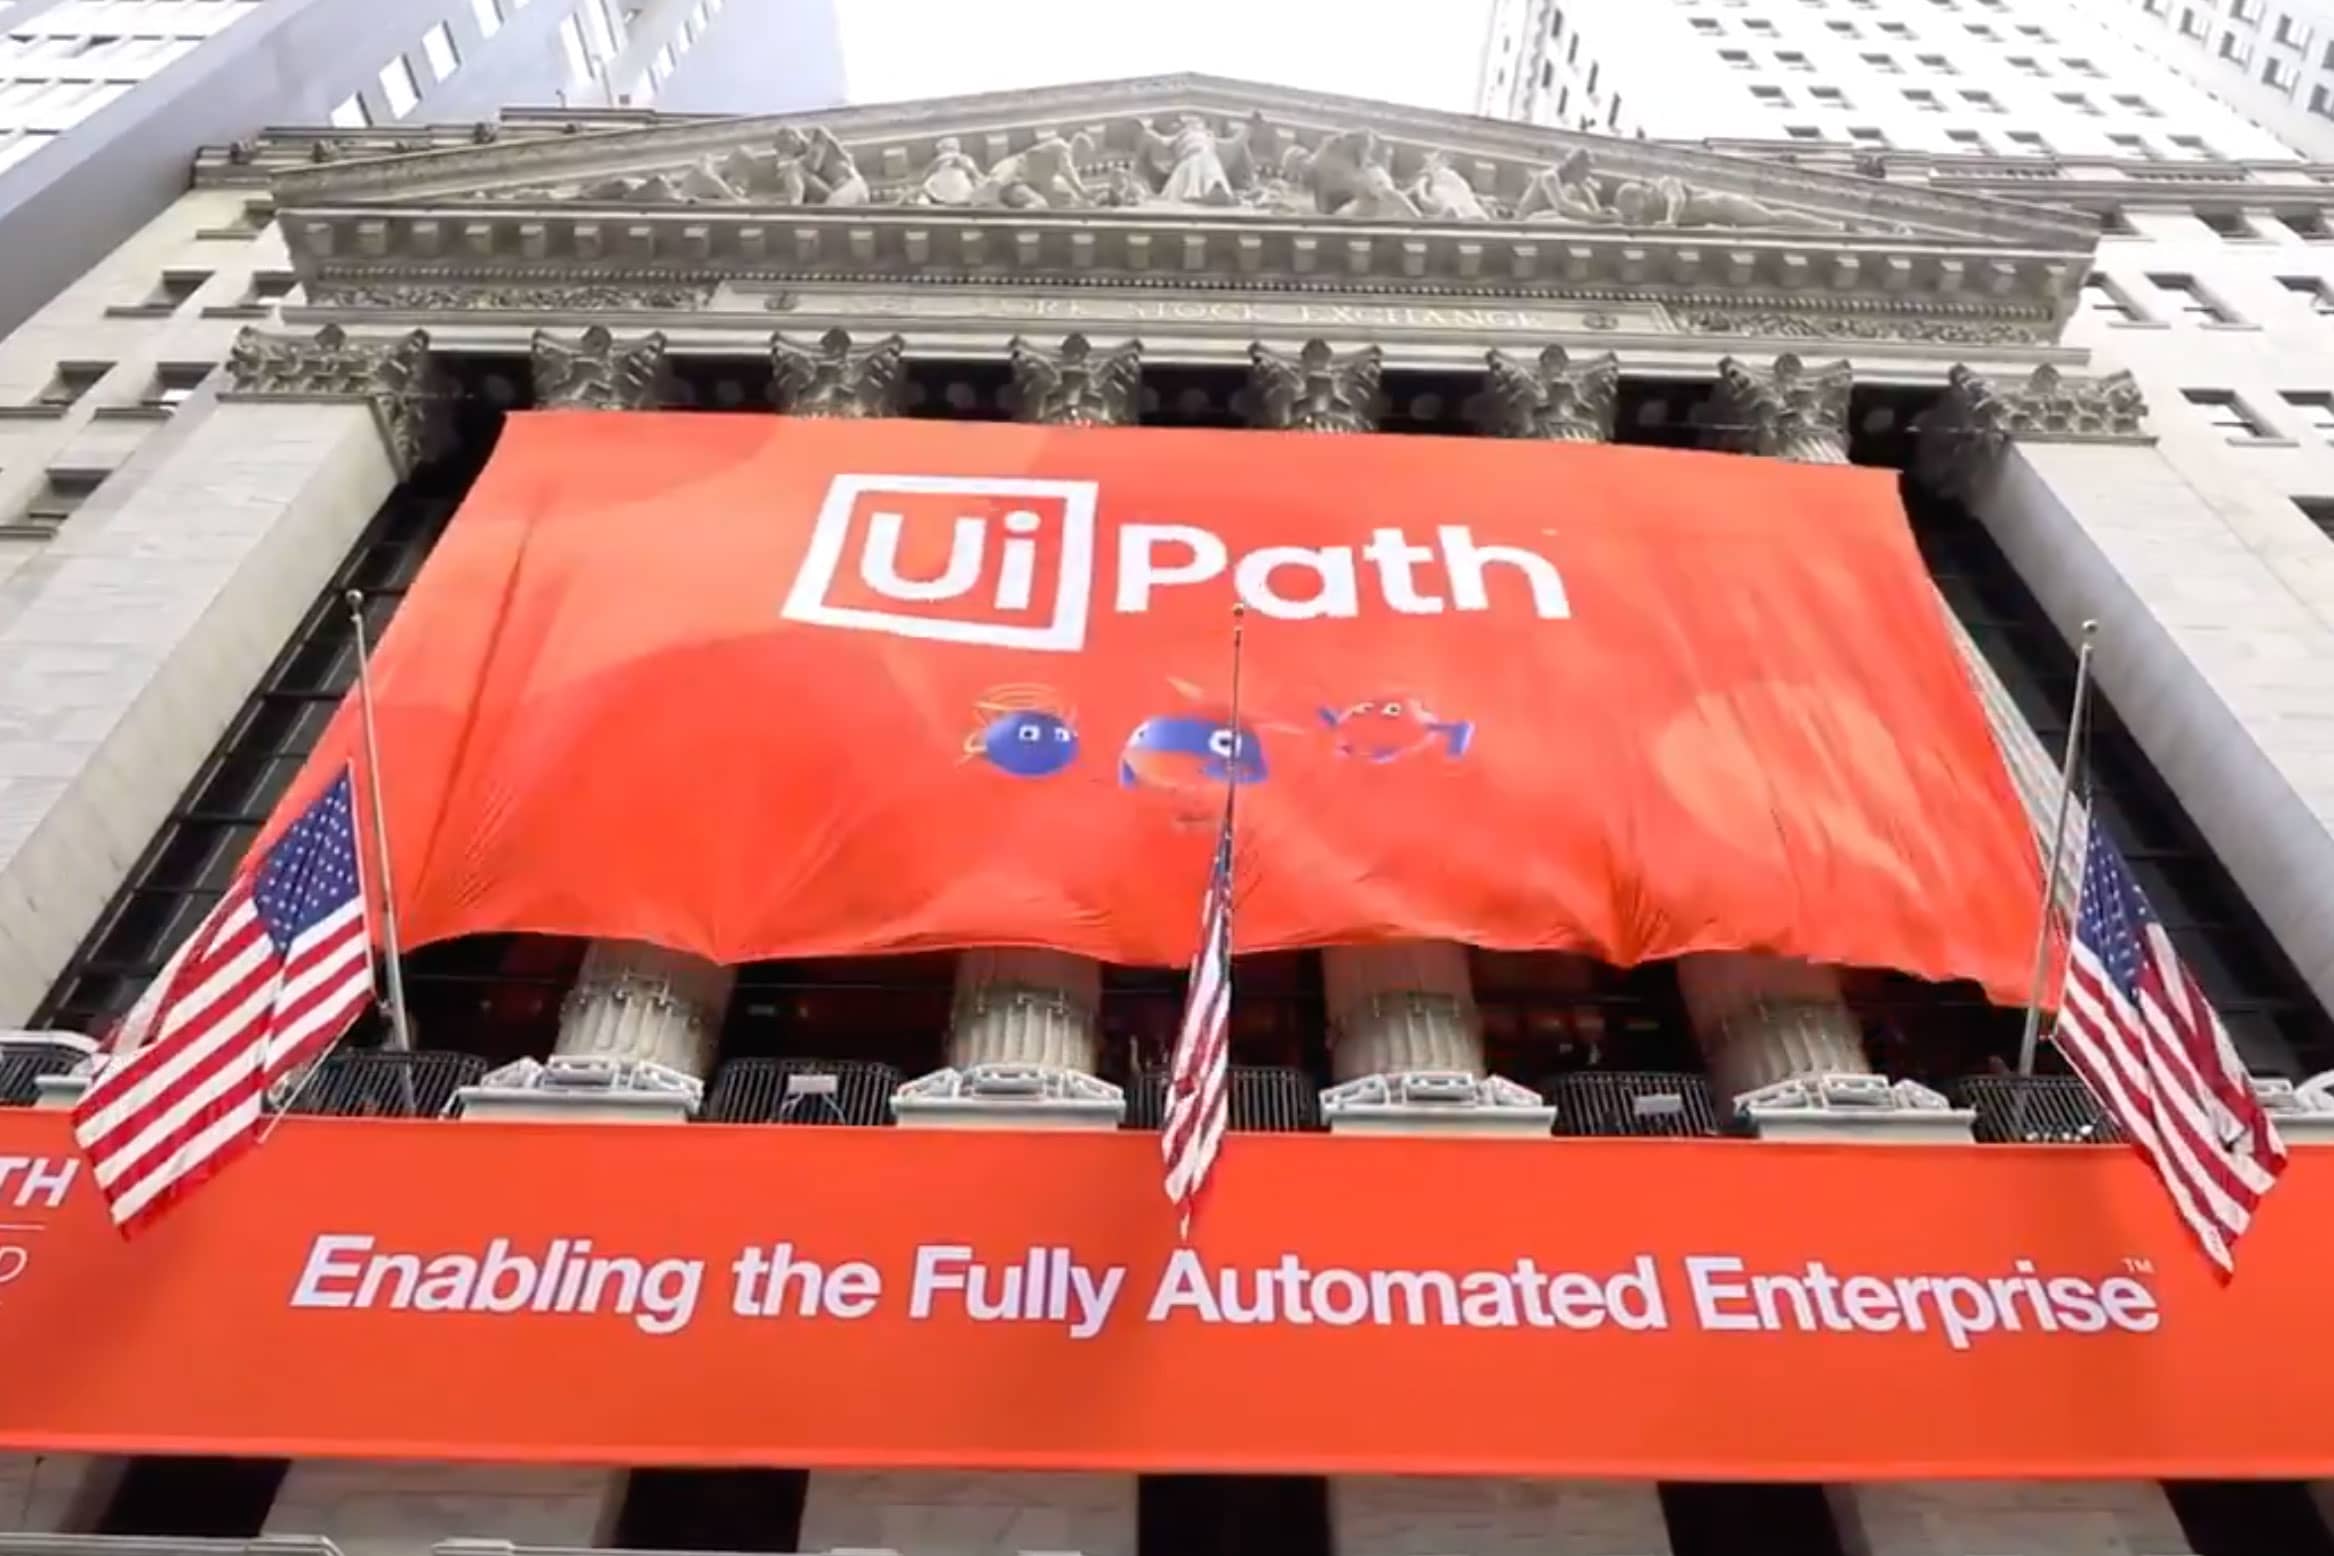 UiPath is up 17% on its NYSE debut, after one of the best IPO software offerings